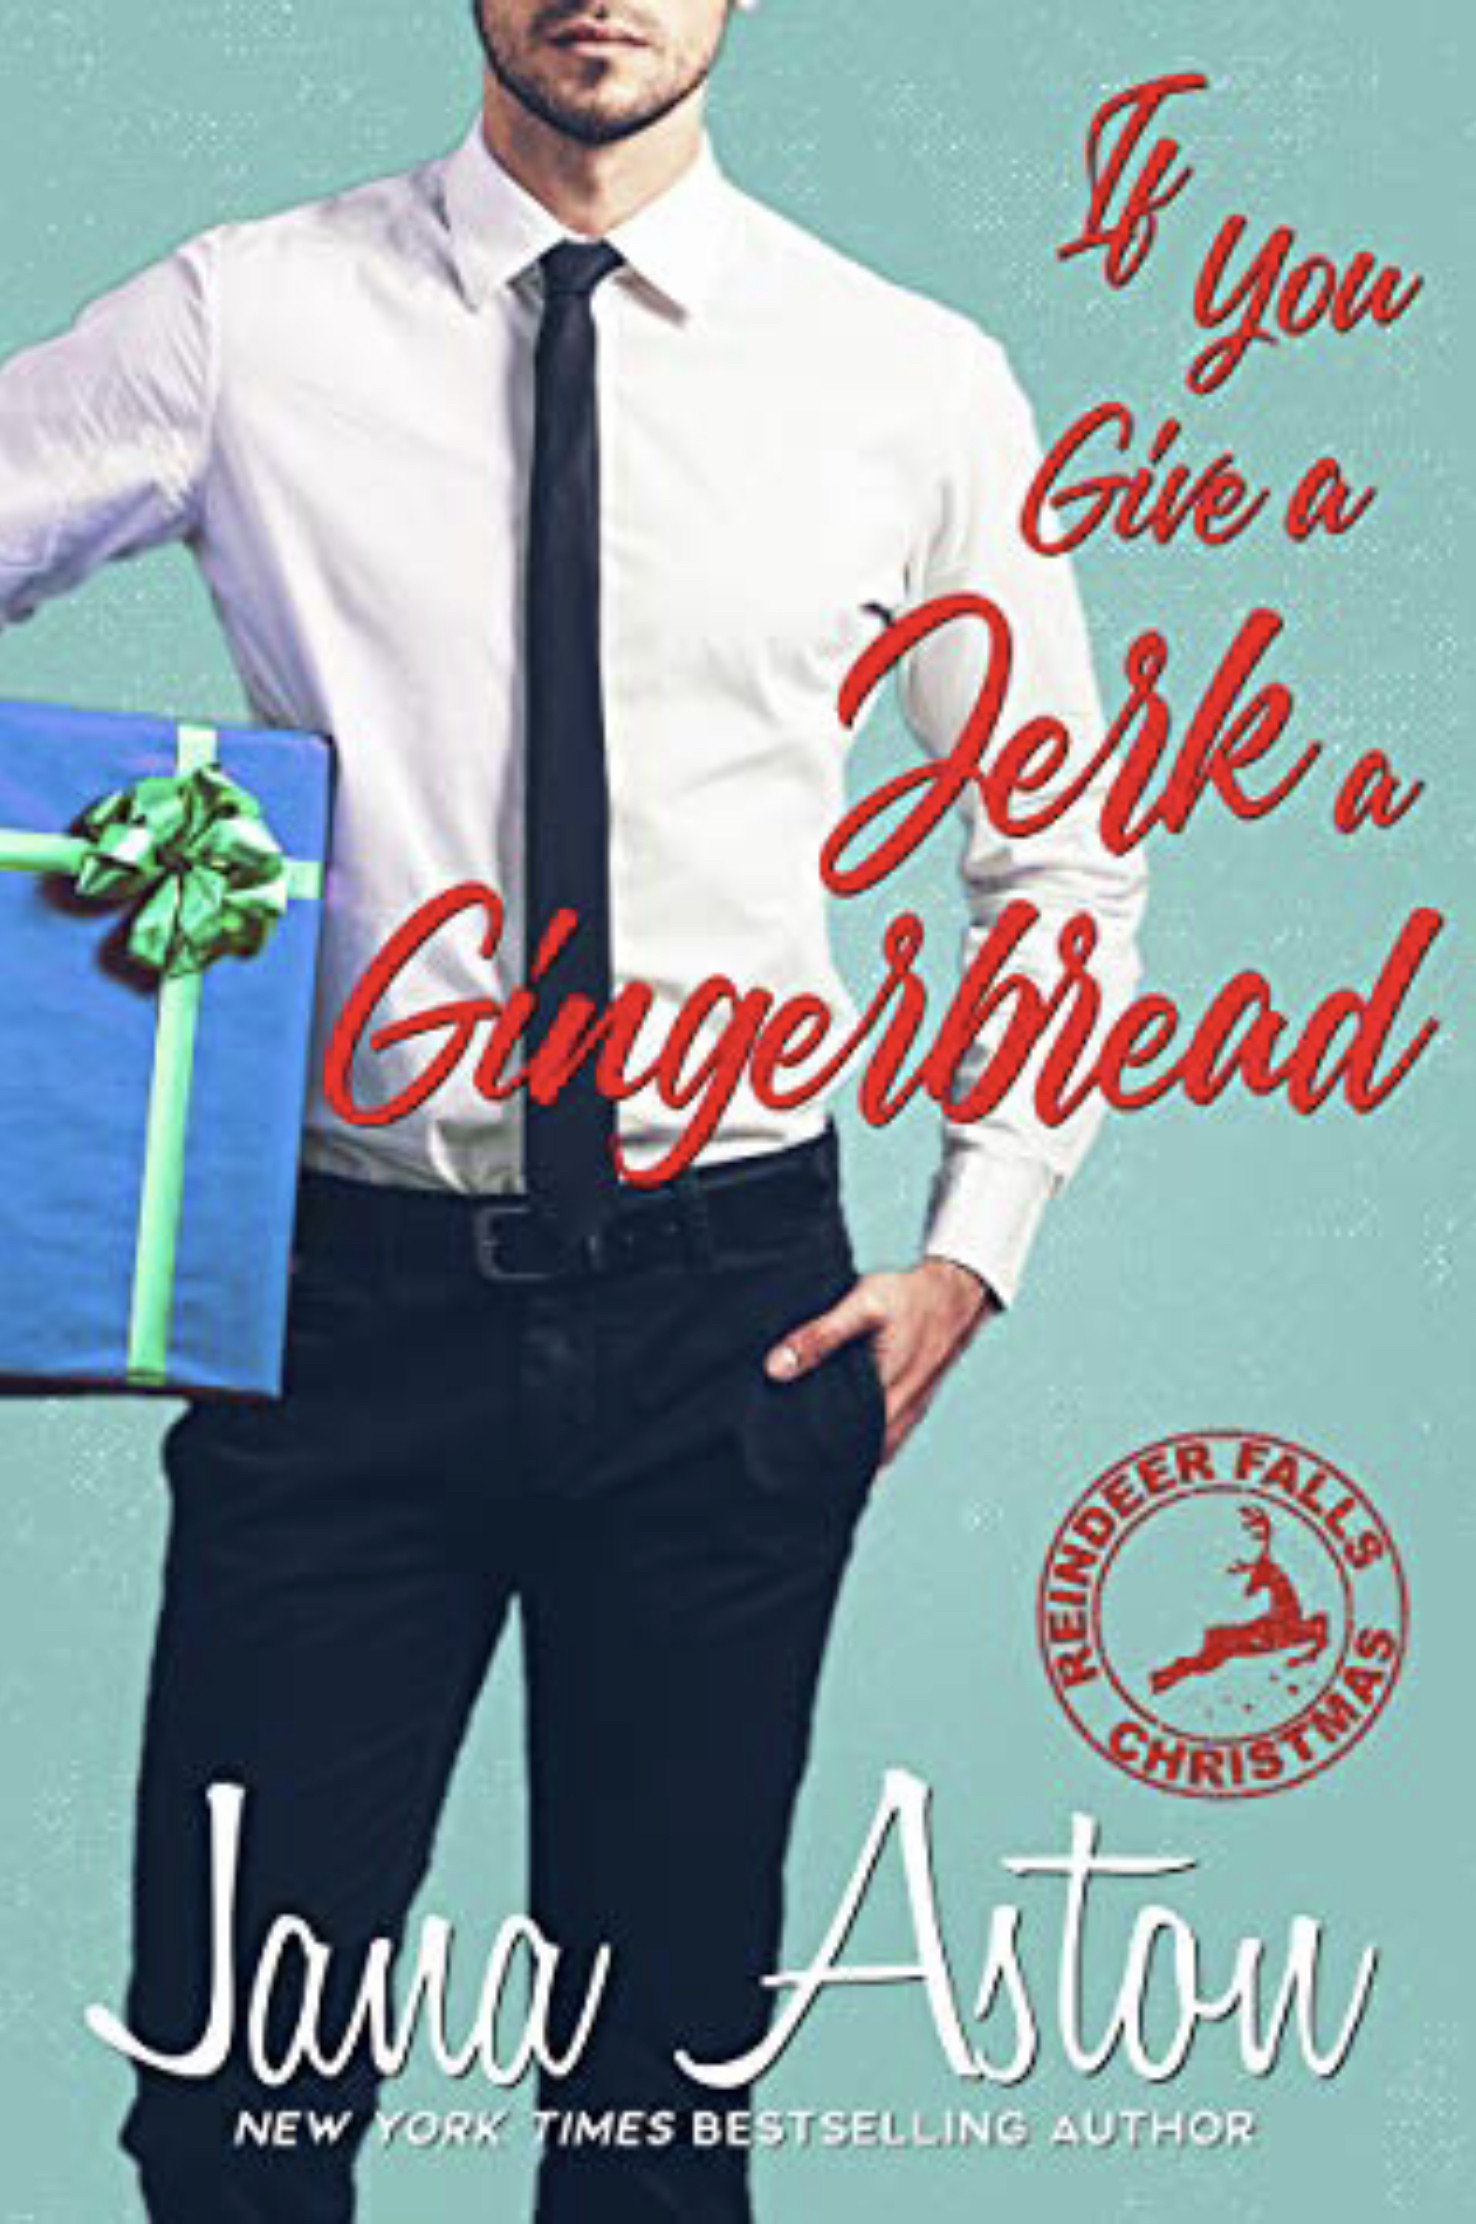 If You Give a Jerk a Gingerbread 